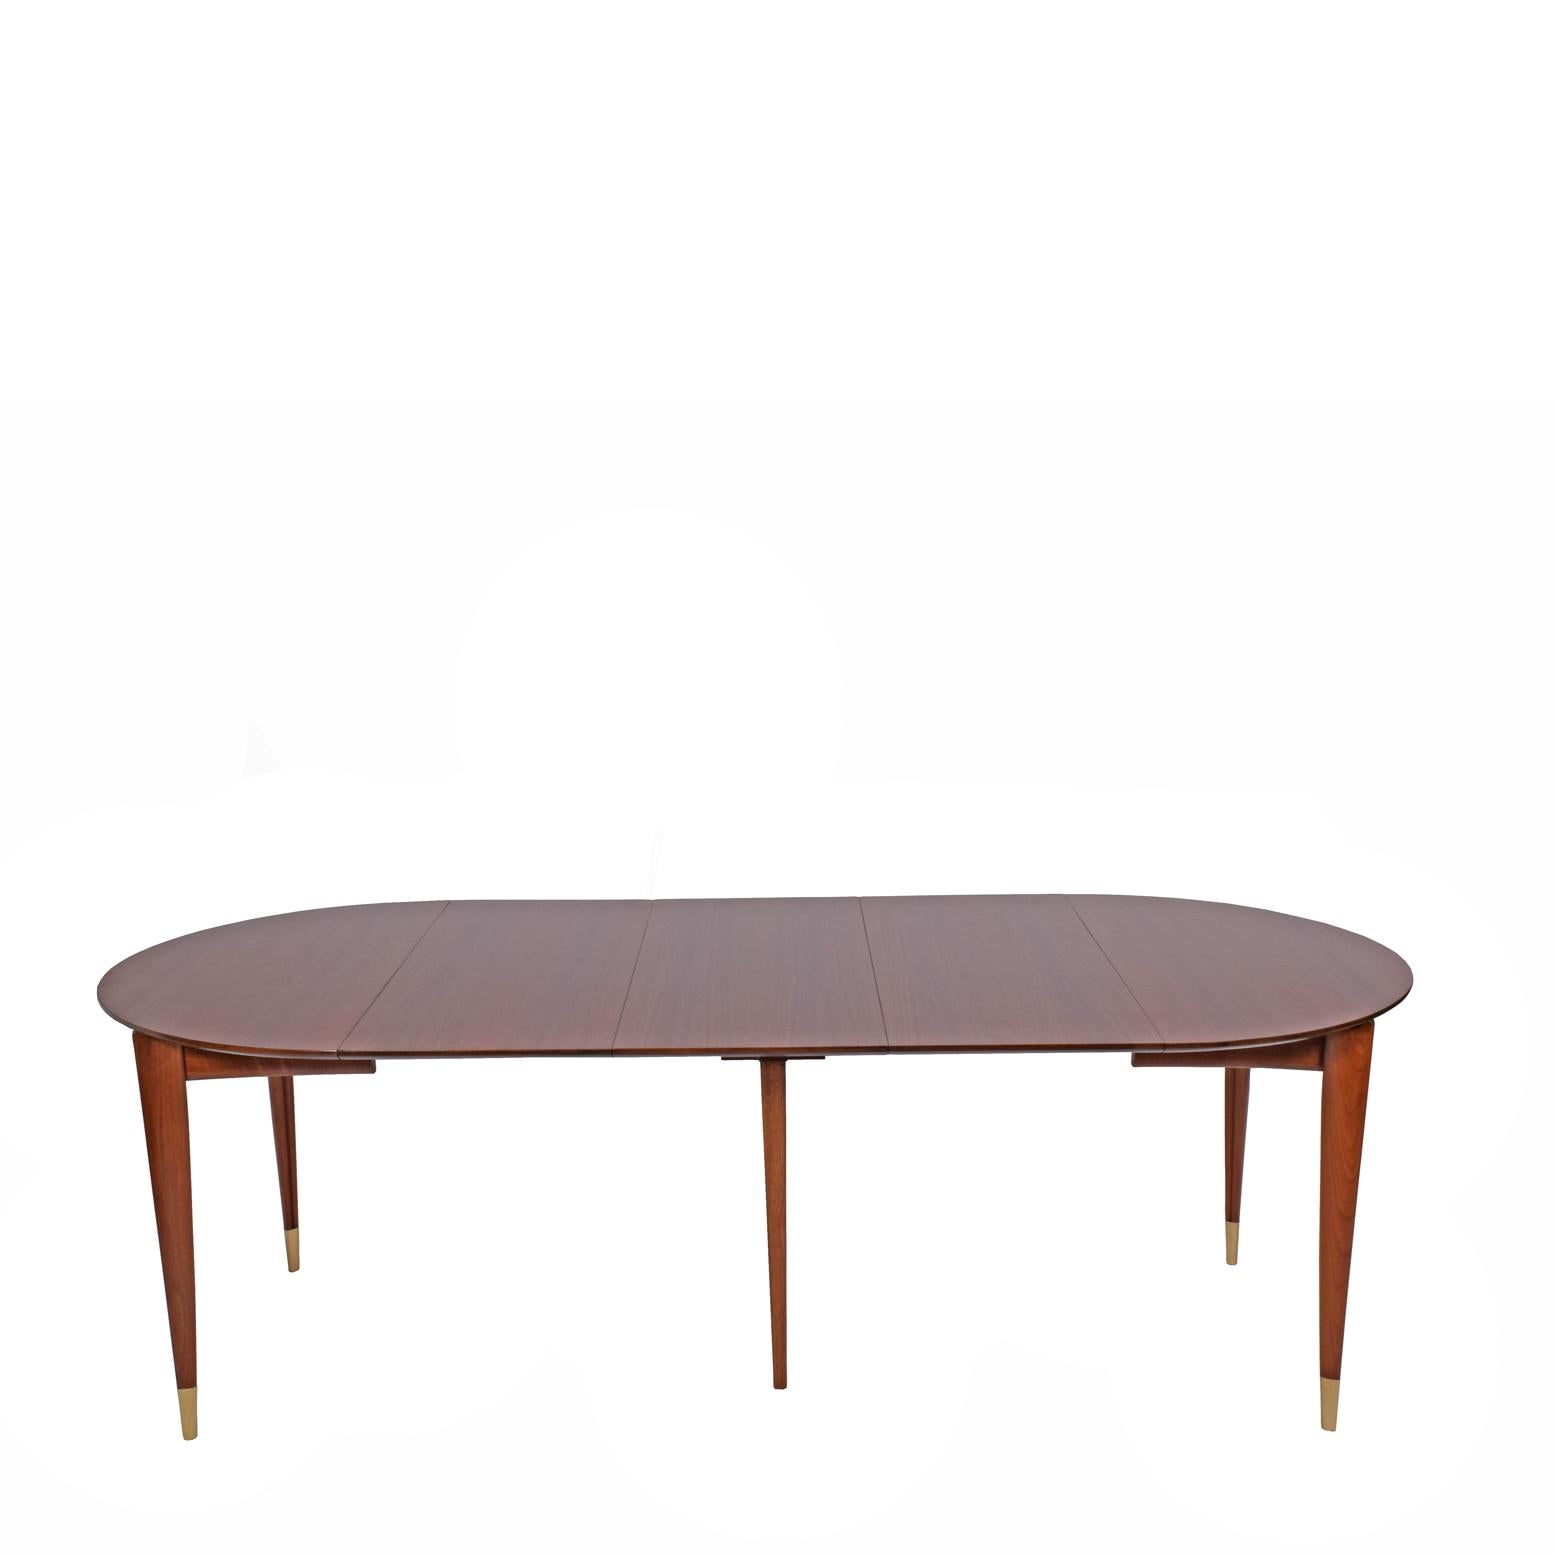 Mid-20th Century Gio Ponti Dining Table Four Leaves for Singer & Son